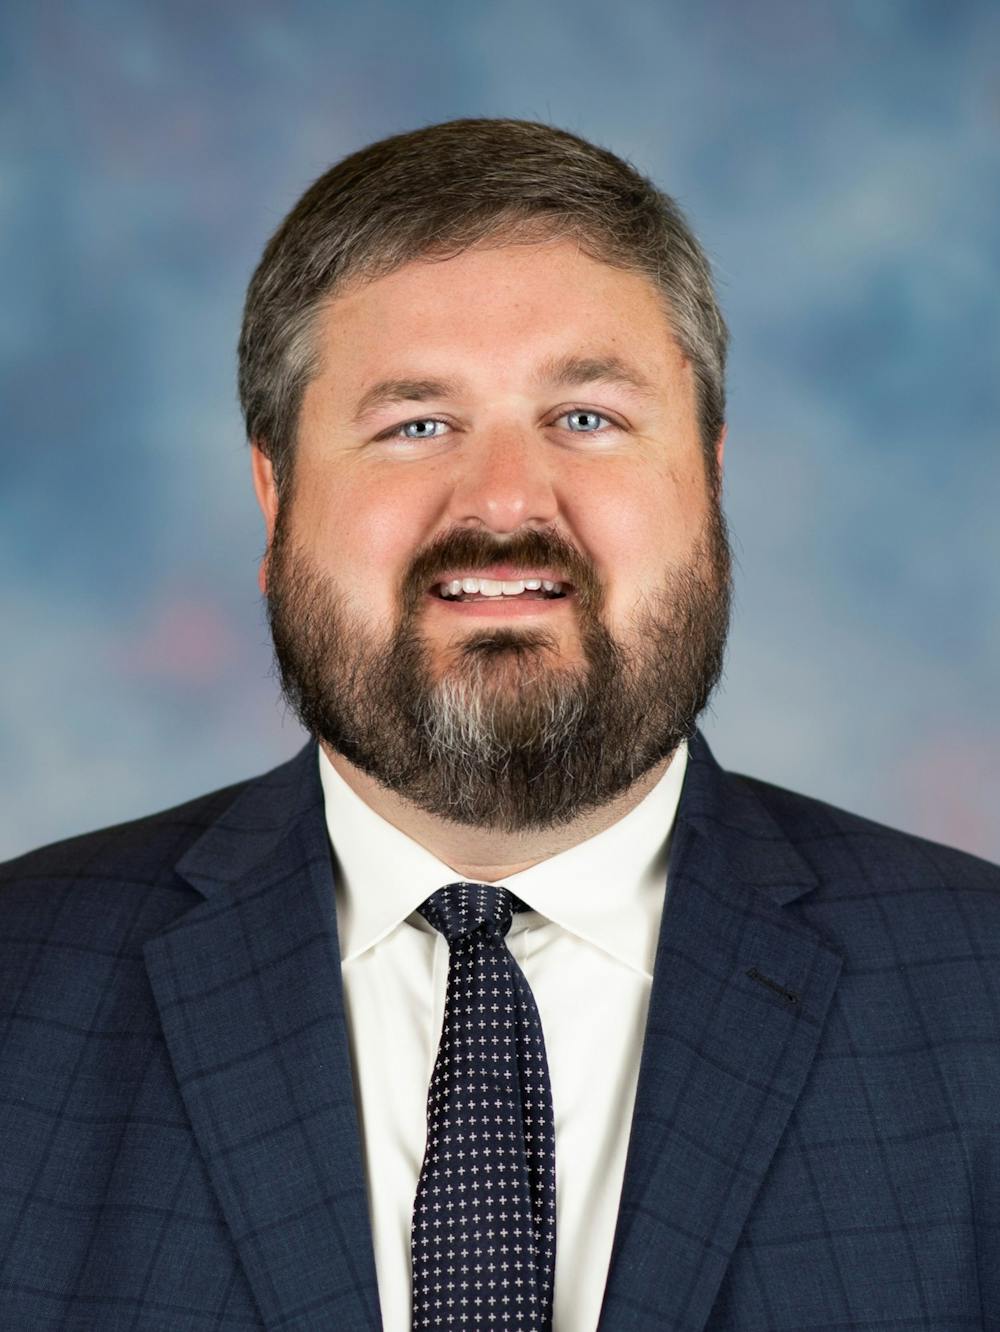 Ward 5 Council member Steven Dixon was elected to the City Council in 2018.